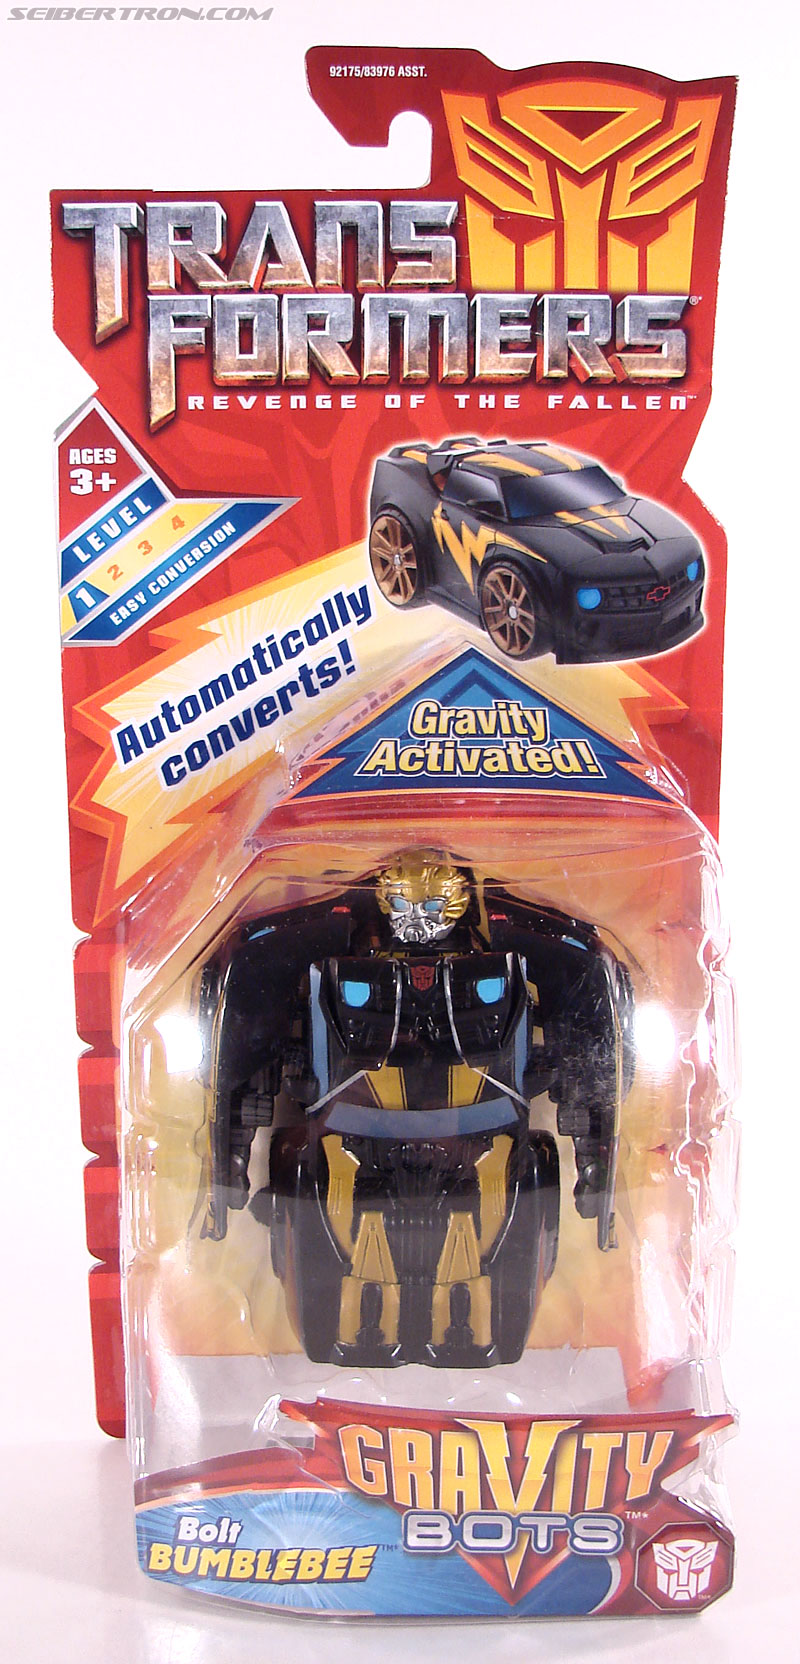 Transformers Revenge of the Fallen Bolt Bumblebee (Image #1 of 50)